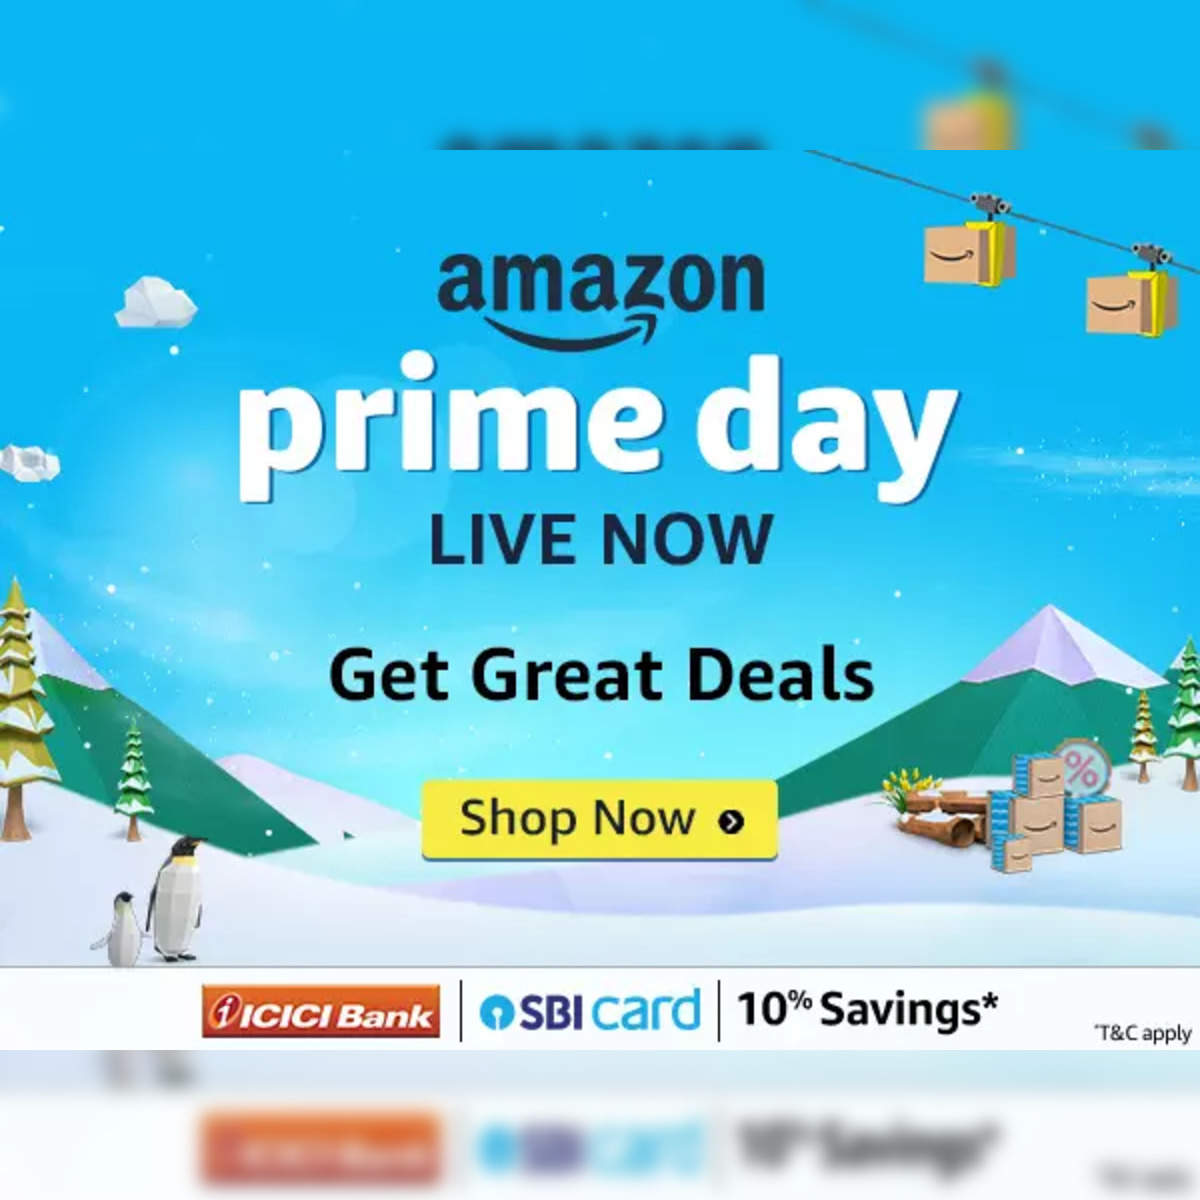 lightning deals: How to find flash sales on Prime Day 